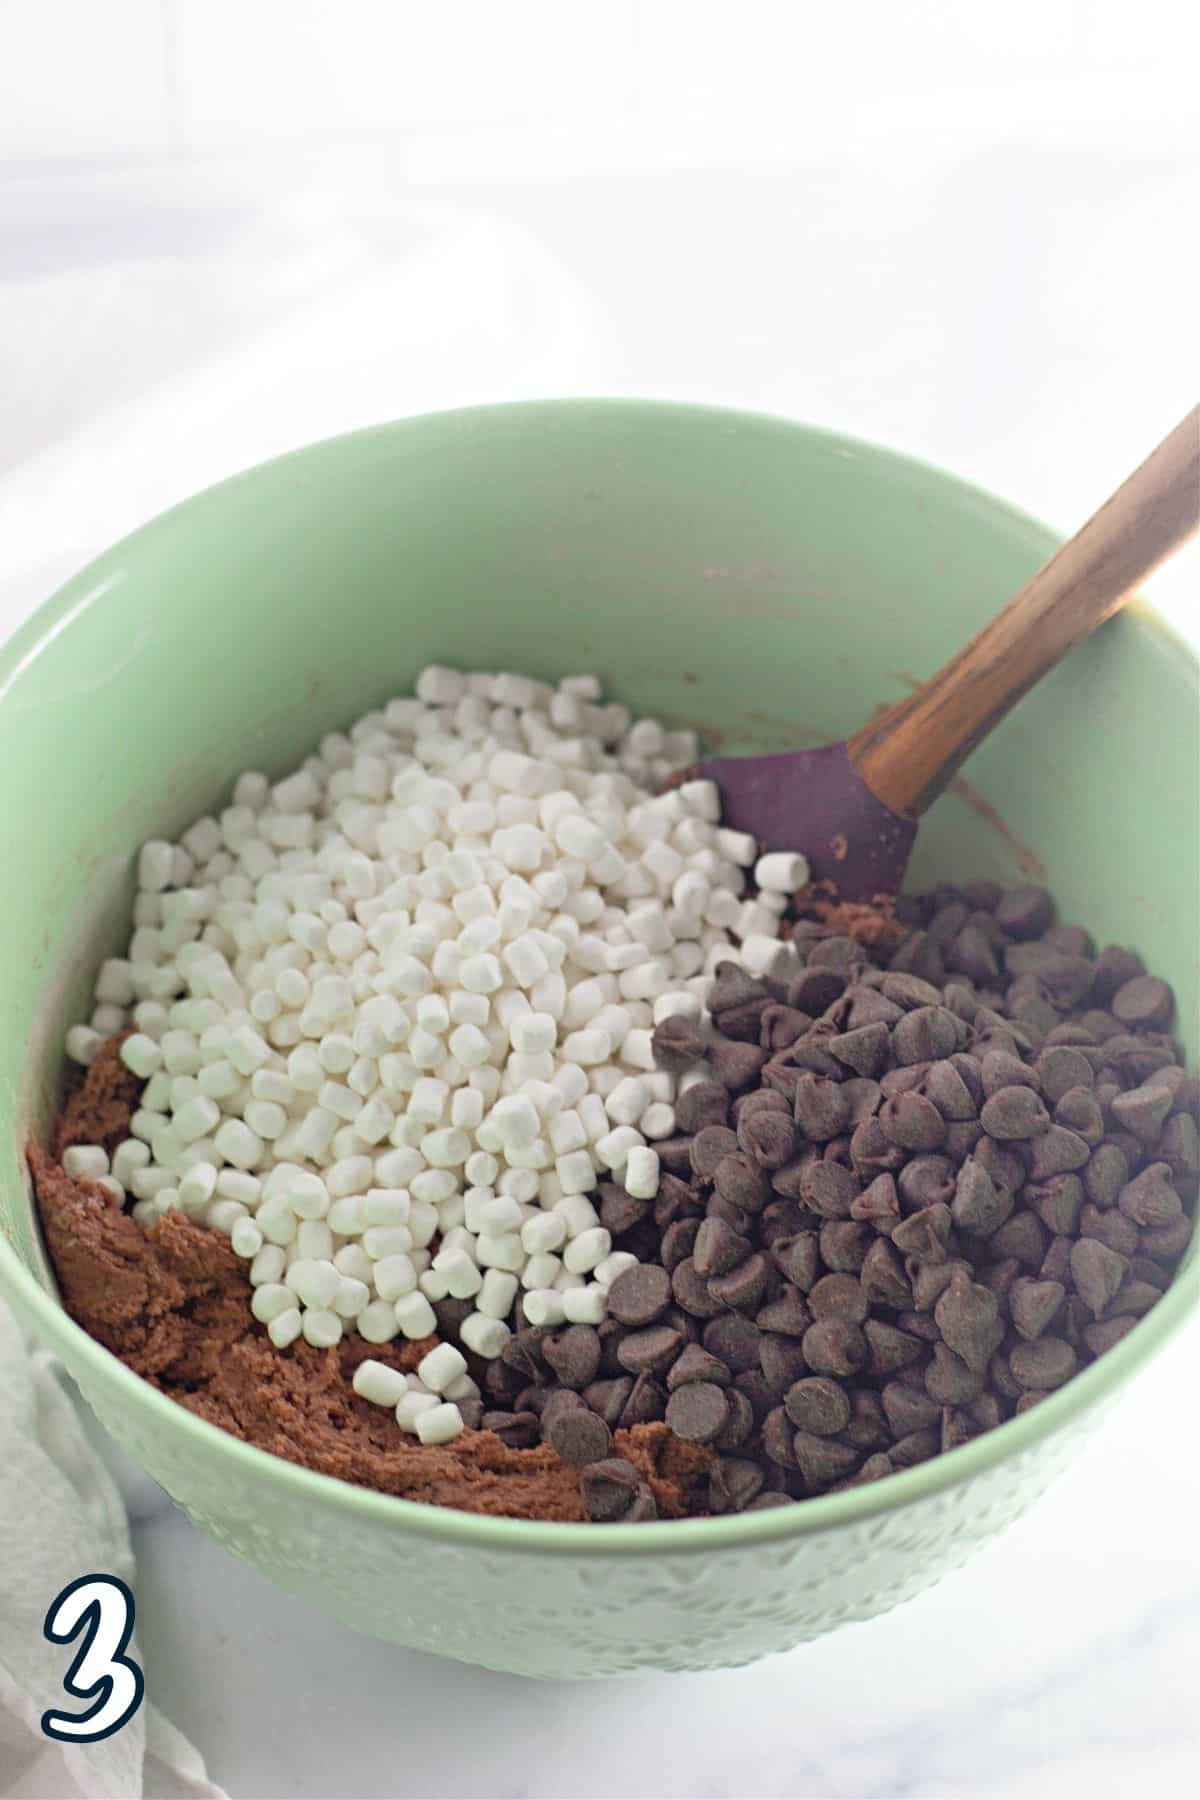 Chocolate chips, dried marshmallow, and cookie dough in a bowl with a wooden spoon.